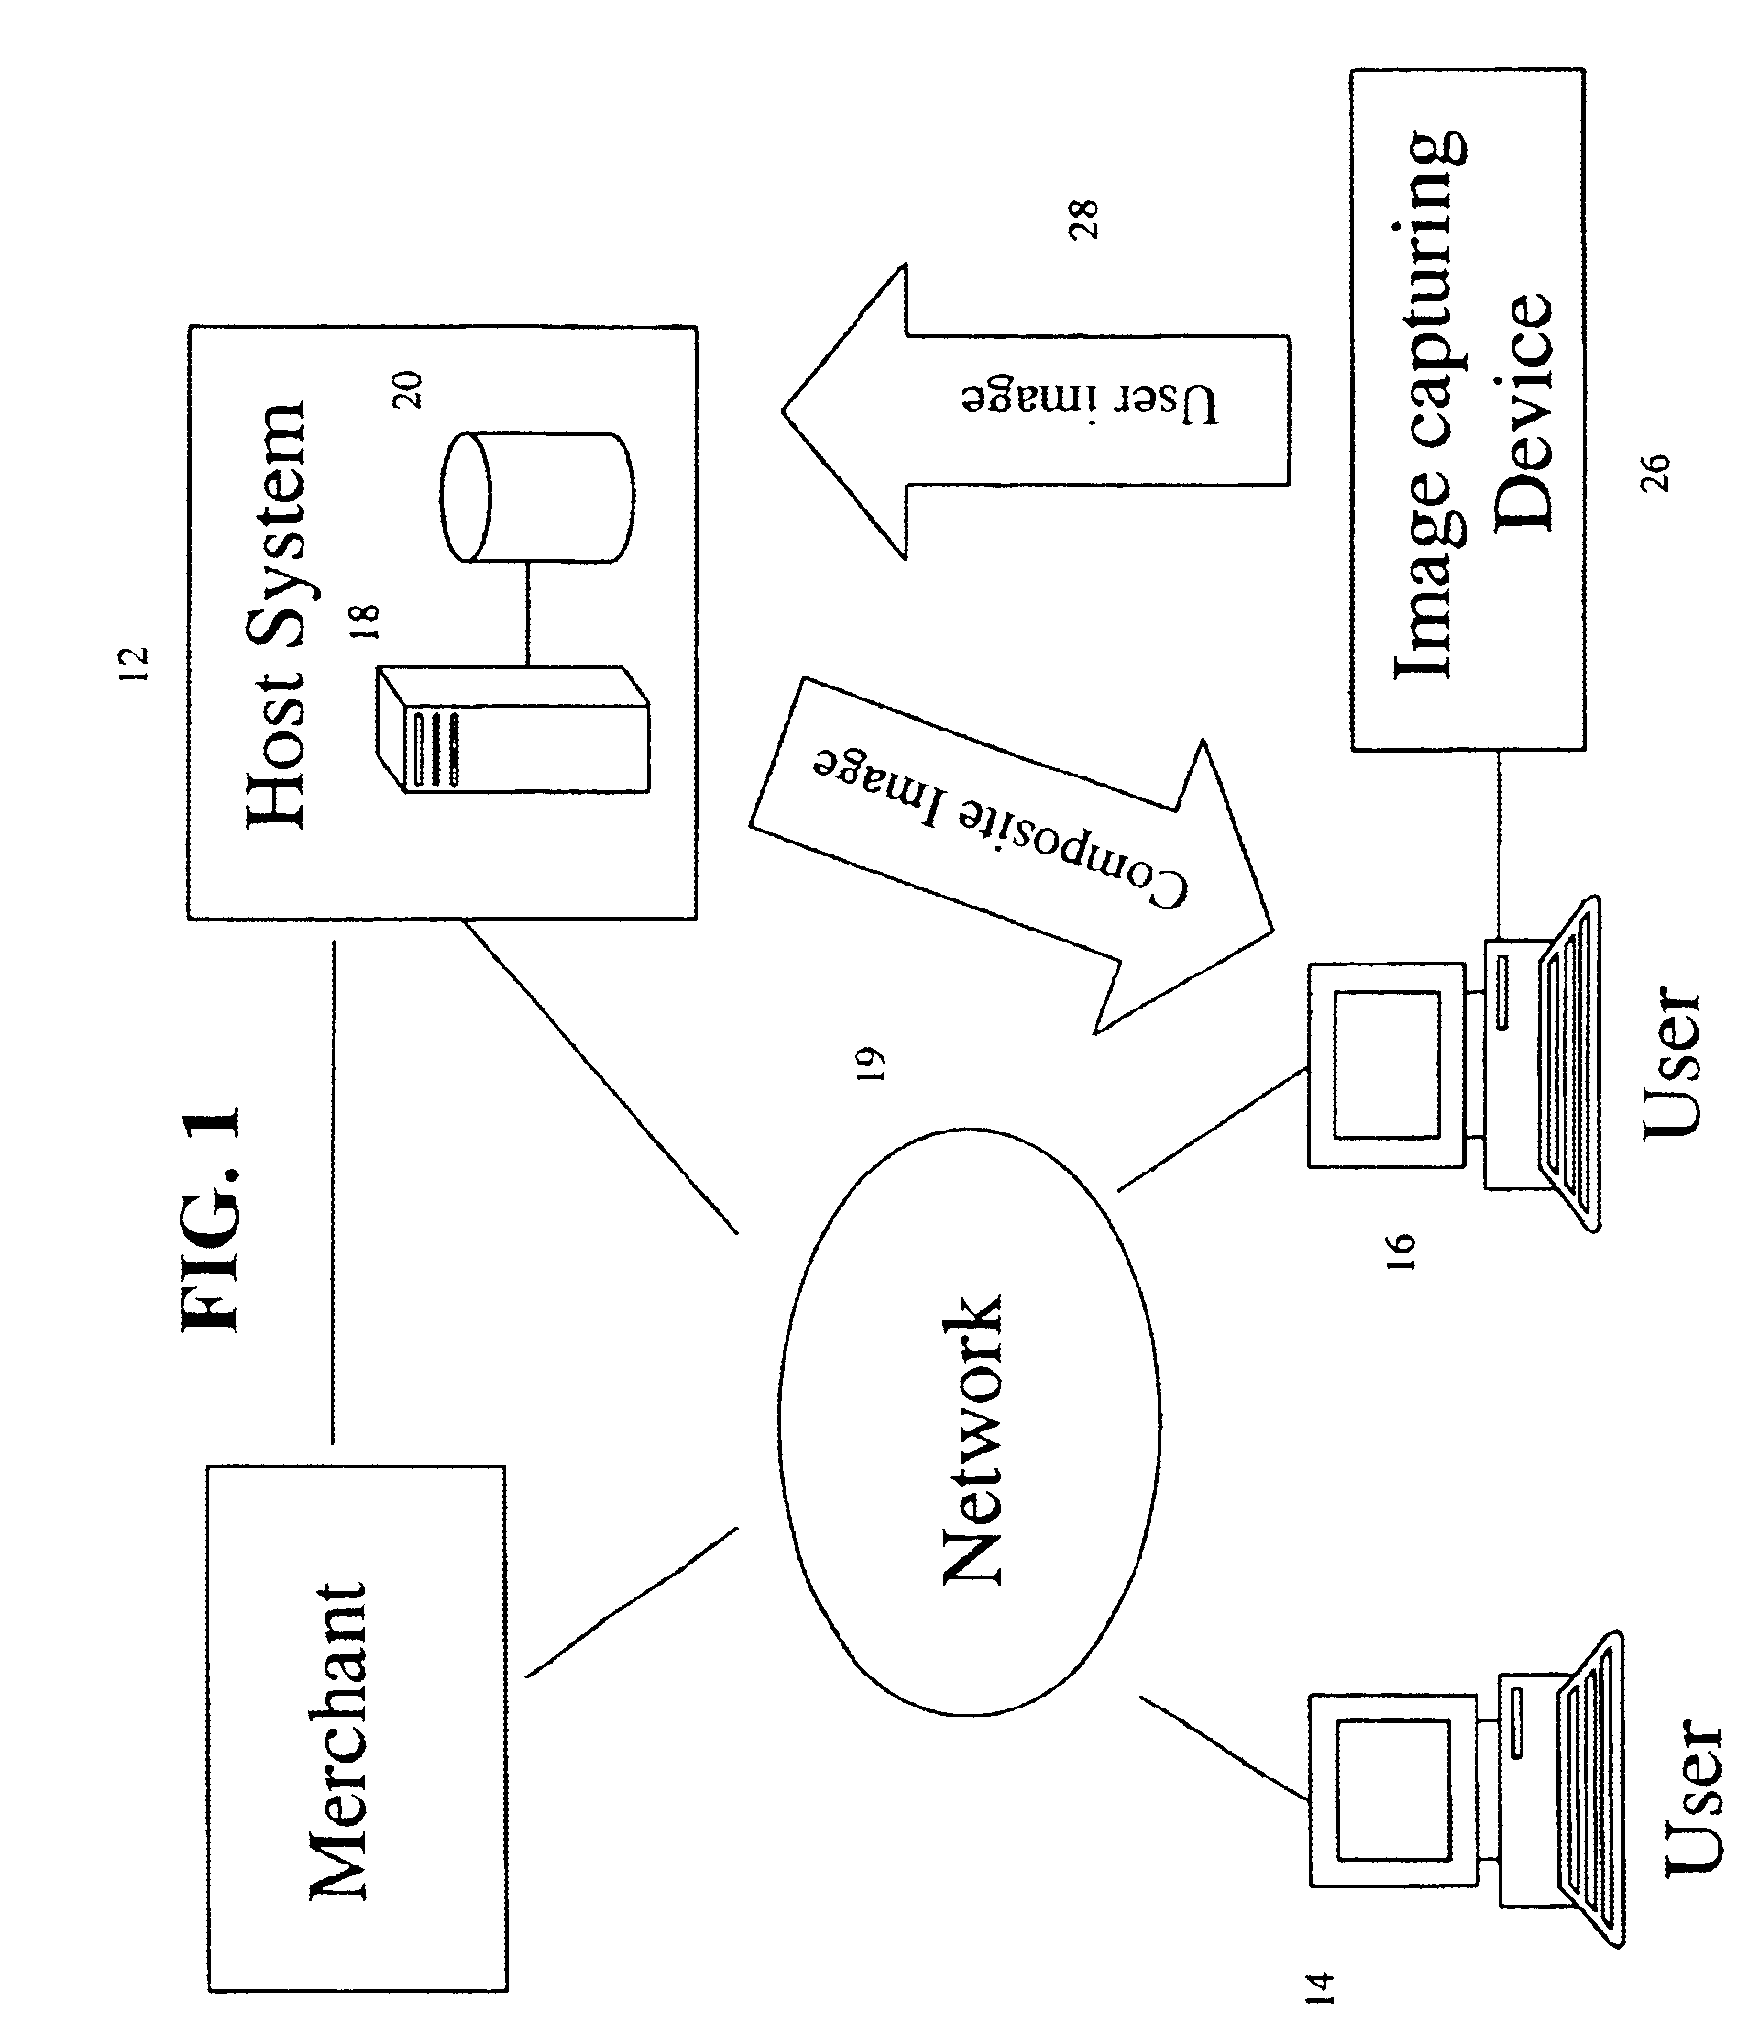 Make-up and fashion accessory display and marketing system and method